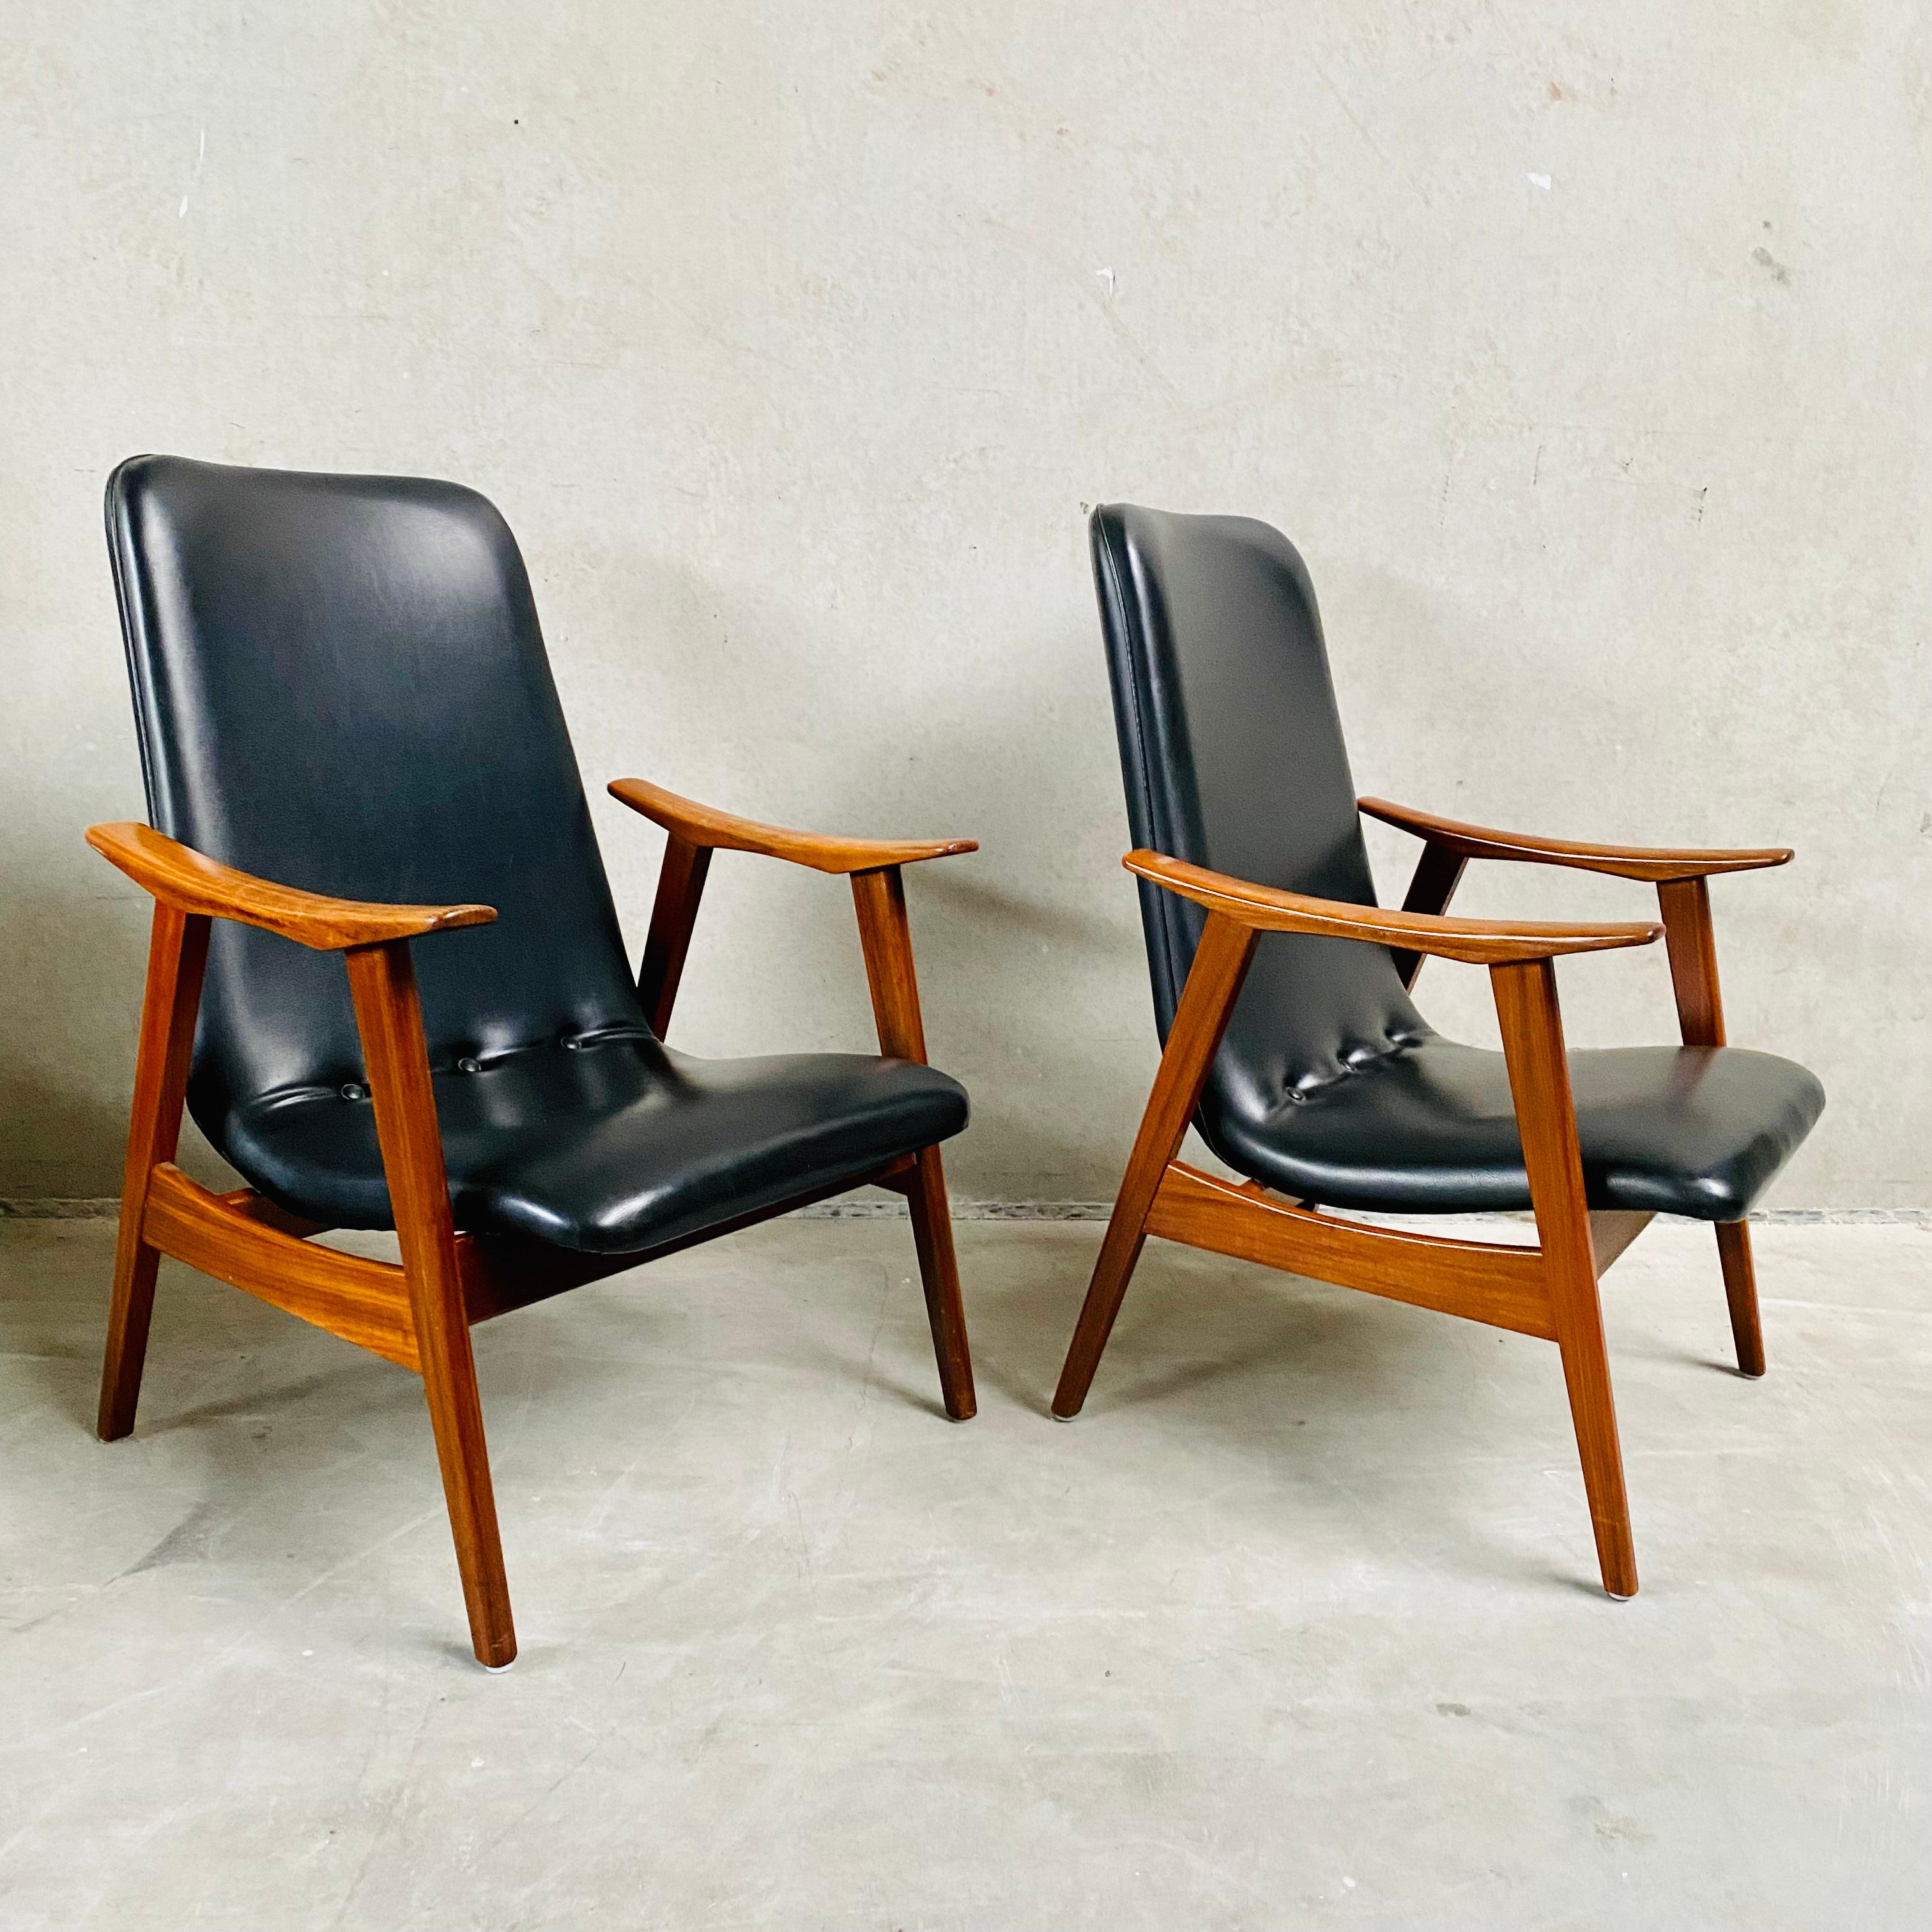 Teak lounge chairs with skai leather upholstery.
High back model, designed by Louis Van Teeffelen for Webe.

Louis Van Teeffelen was the most important designer at Wébé. His work was often influenced by Danish Mid-Century Modern. Like Danish